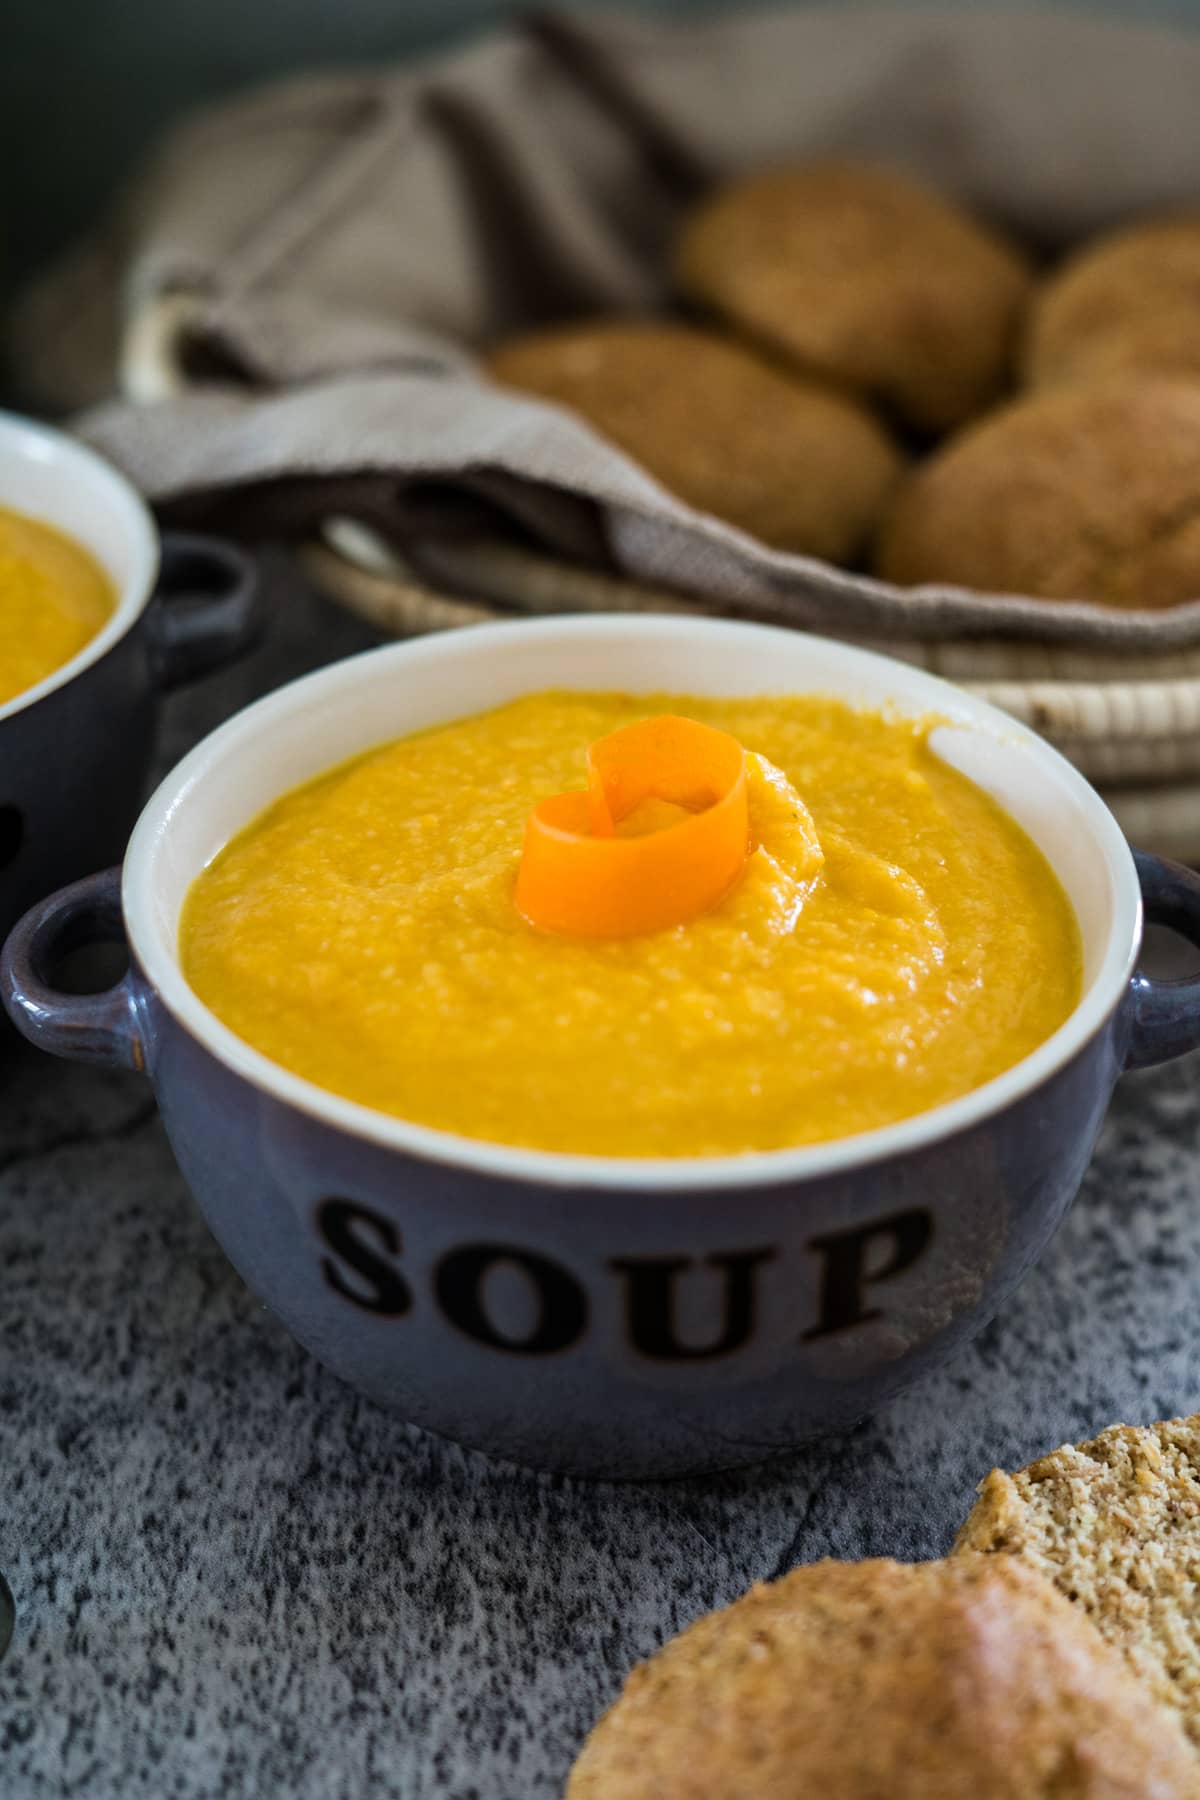 A bowl of carrot soup on a table.